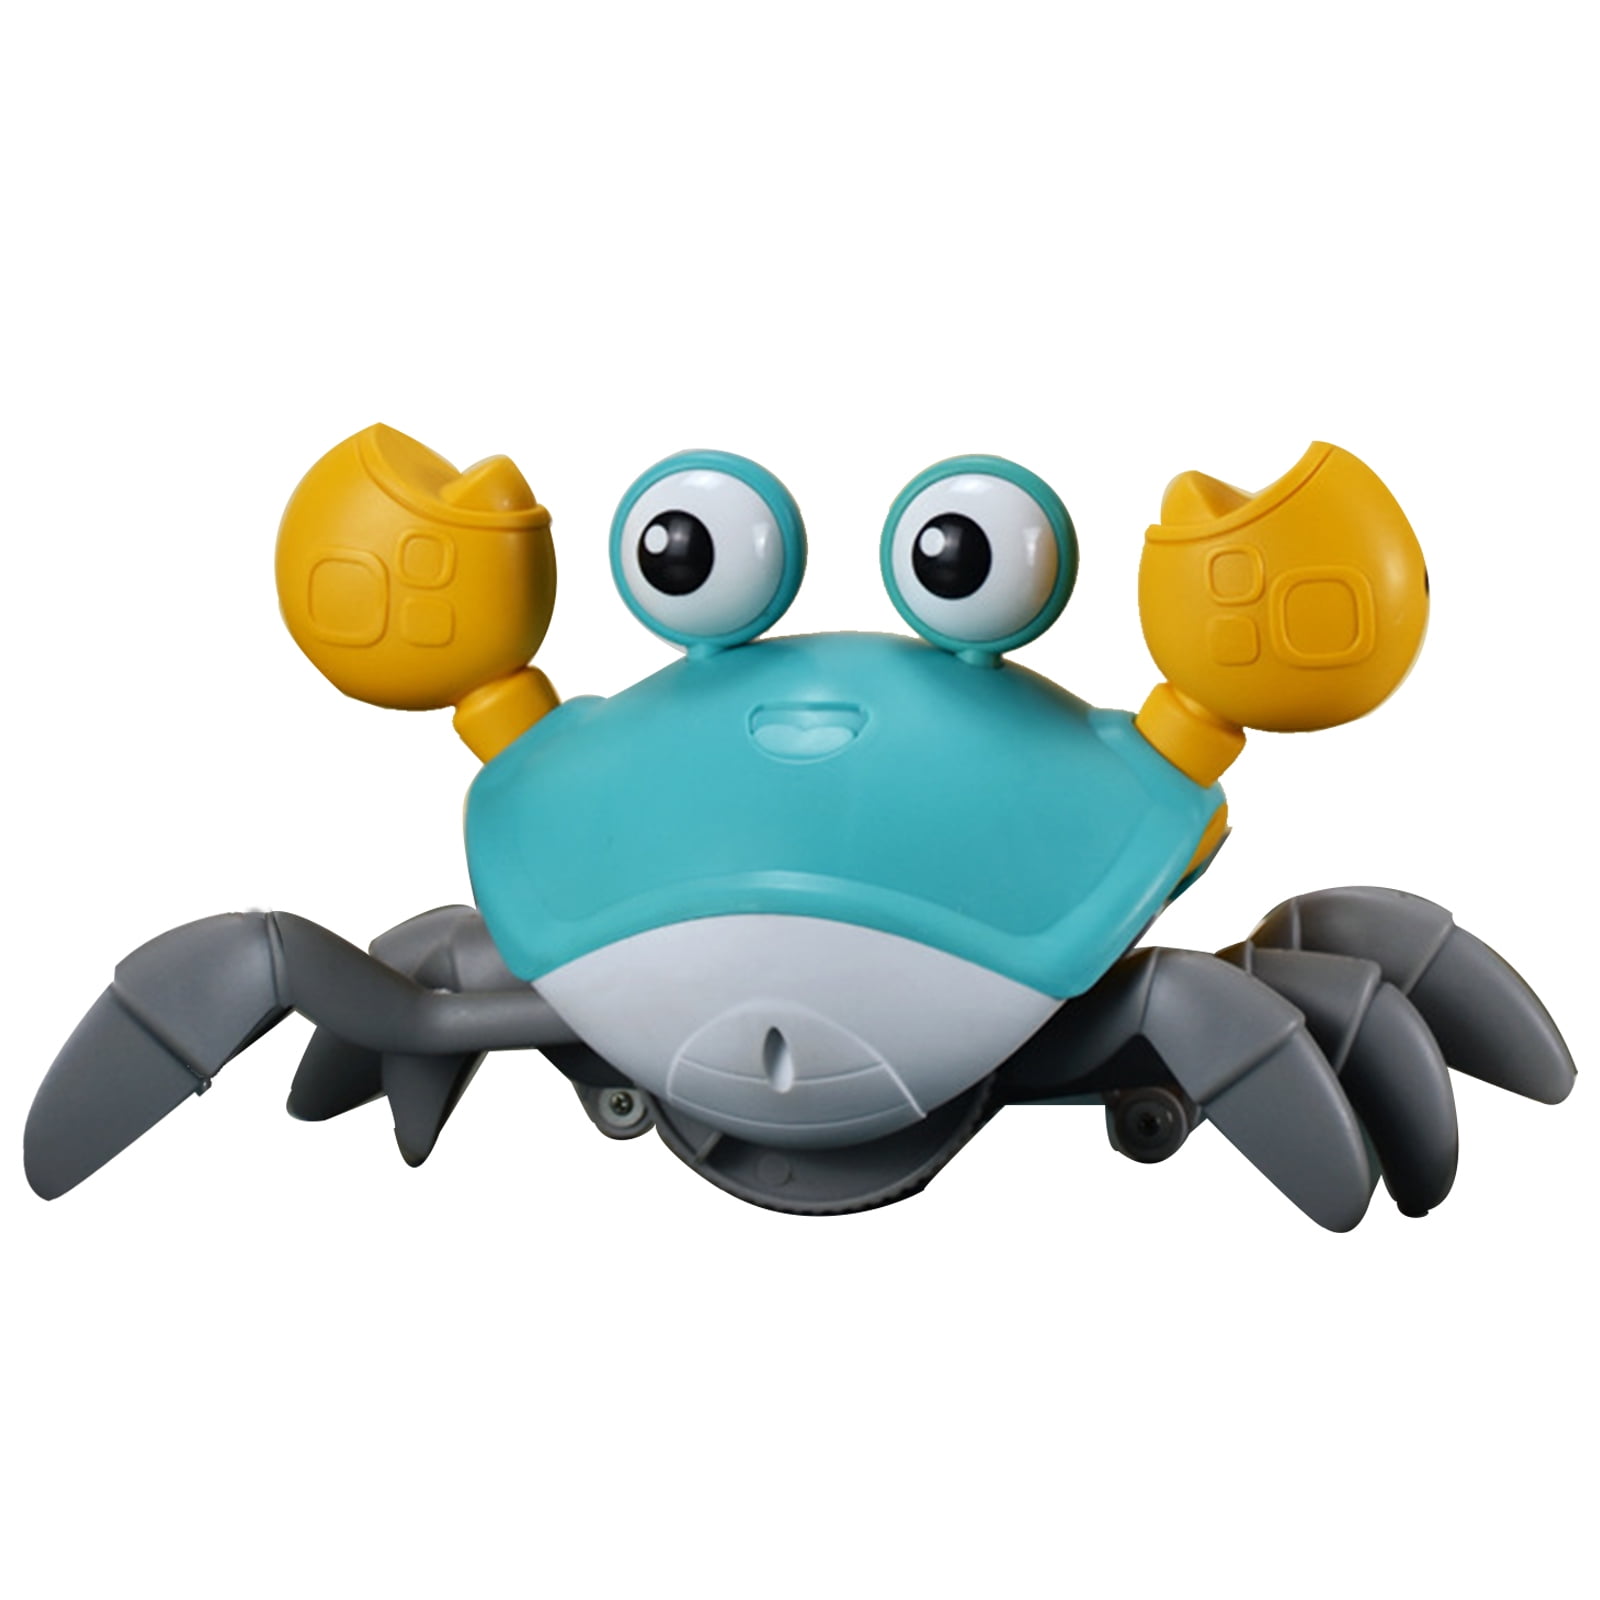 Green Infrared Induction Crab Crawling Toy with Music Light Effect USB Rechargeable Crawling Crab Baby Toy with Sensor Obstacle Avoidance Function Electric Crab Moving Toy for Boys Girls Ages 18 Months+ 